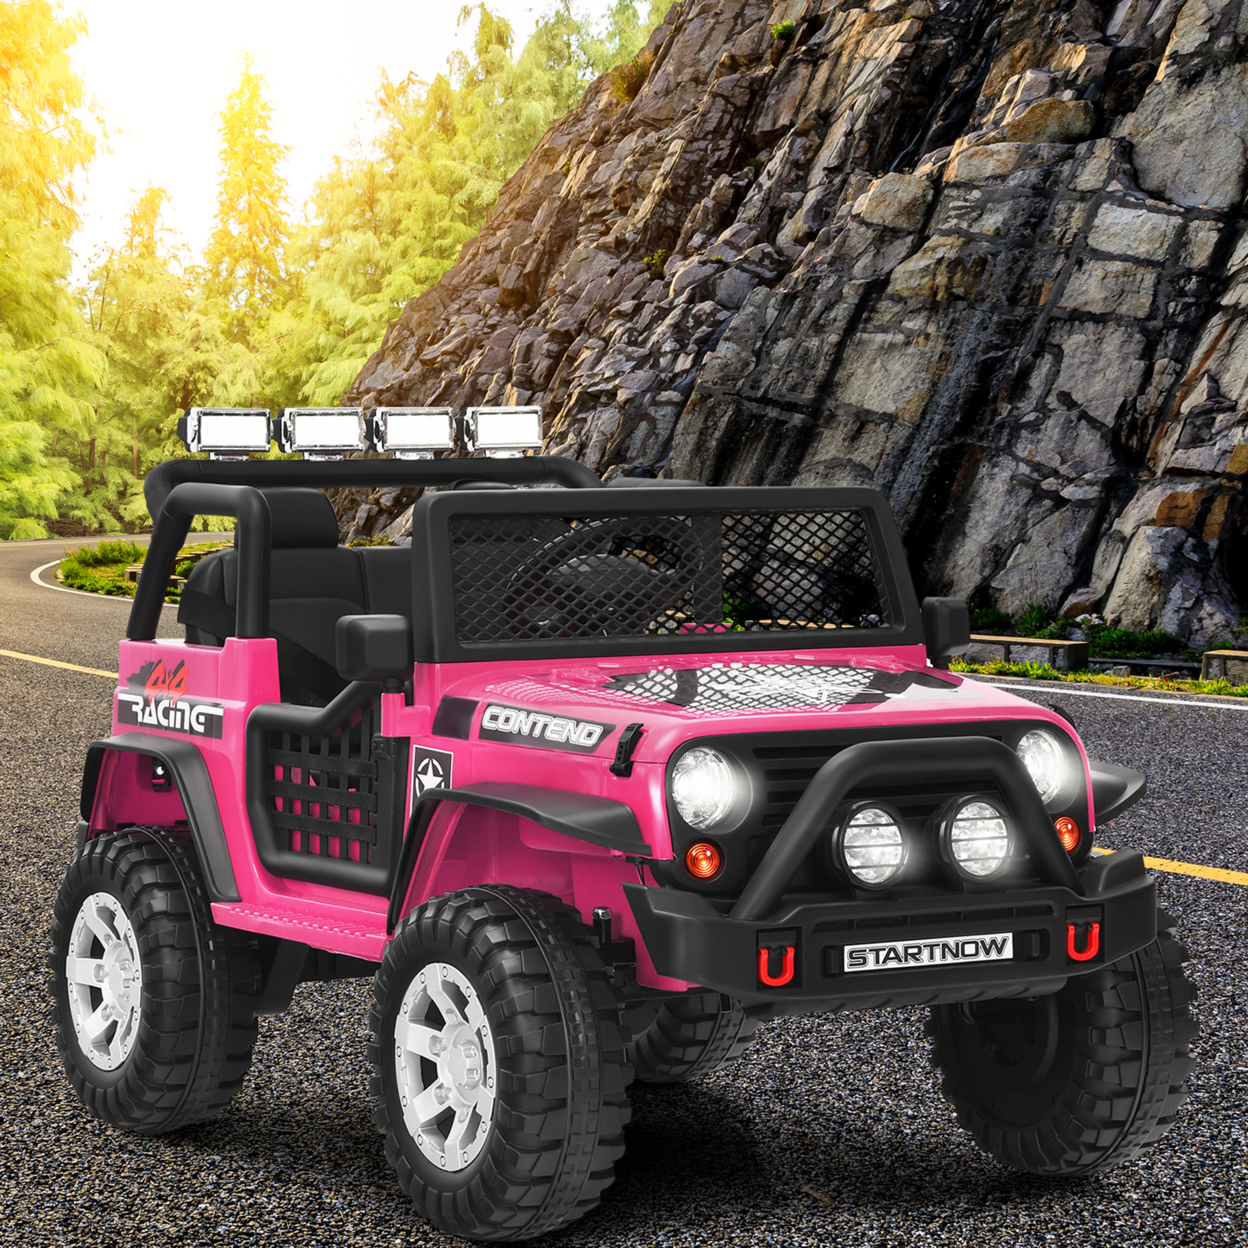 12V Electric Kids Ride On Car Truck W/ MP3 Horn 2.4G Remote Control - Pink